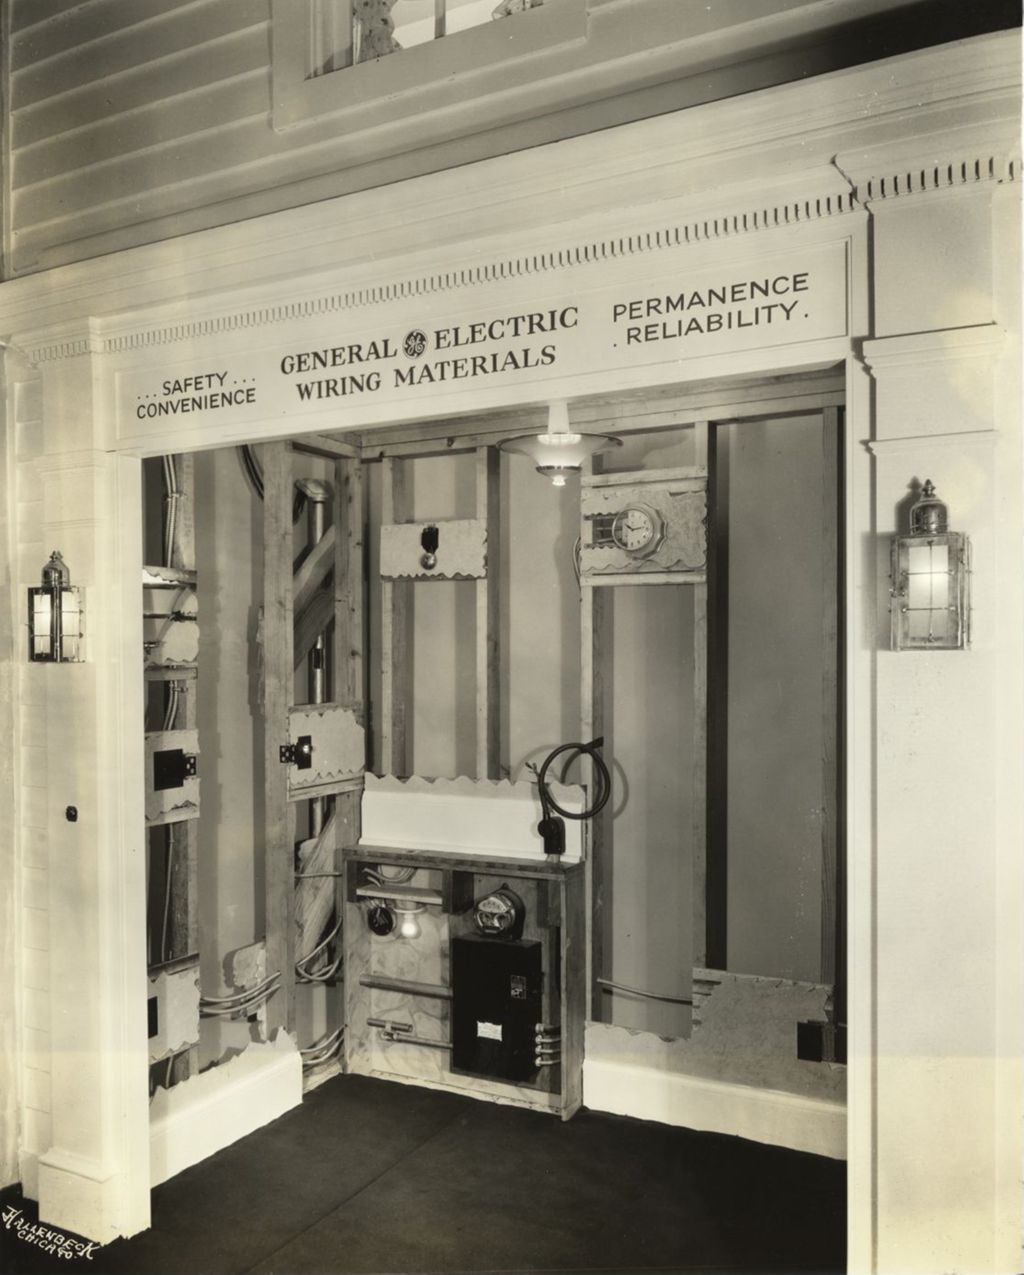 Miniature of General Electric exhibit shows how homes are wired for electric service